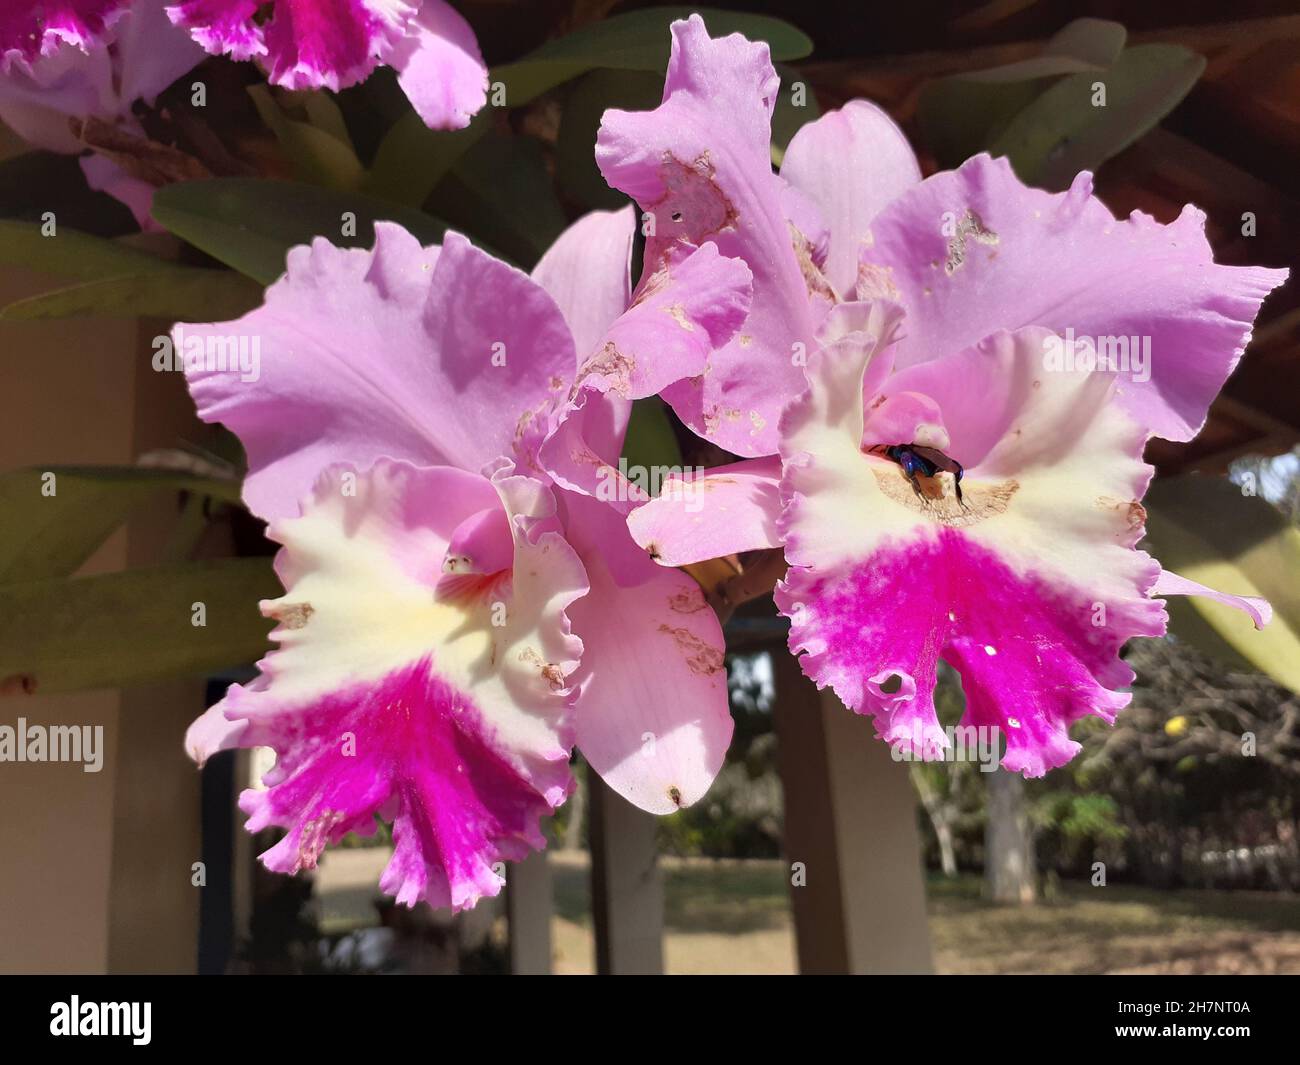 View of a bouquet of Cattleya labiata or orchid, or queen of the northeast, with an insect inside the flower. Stock Photo